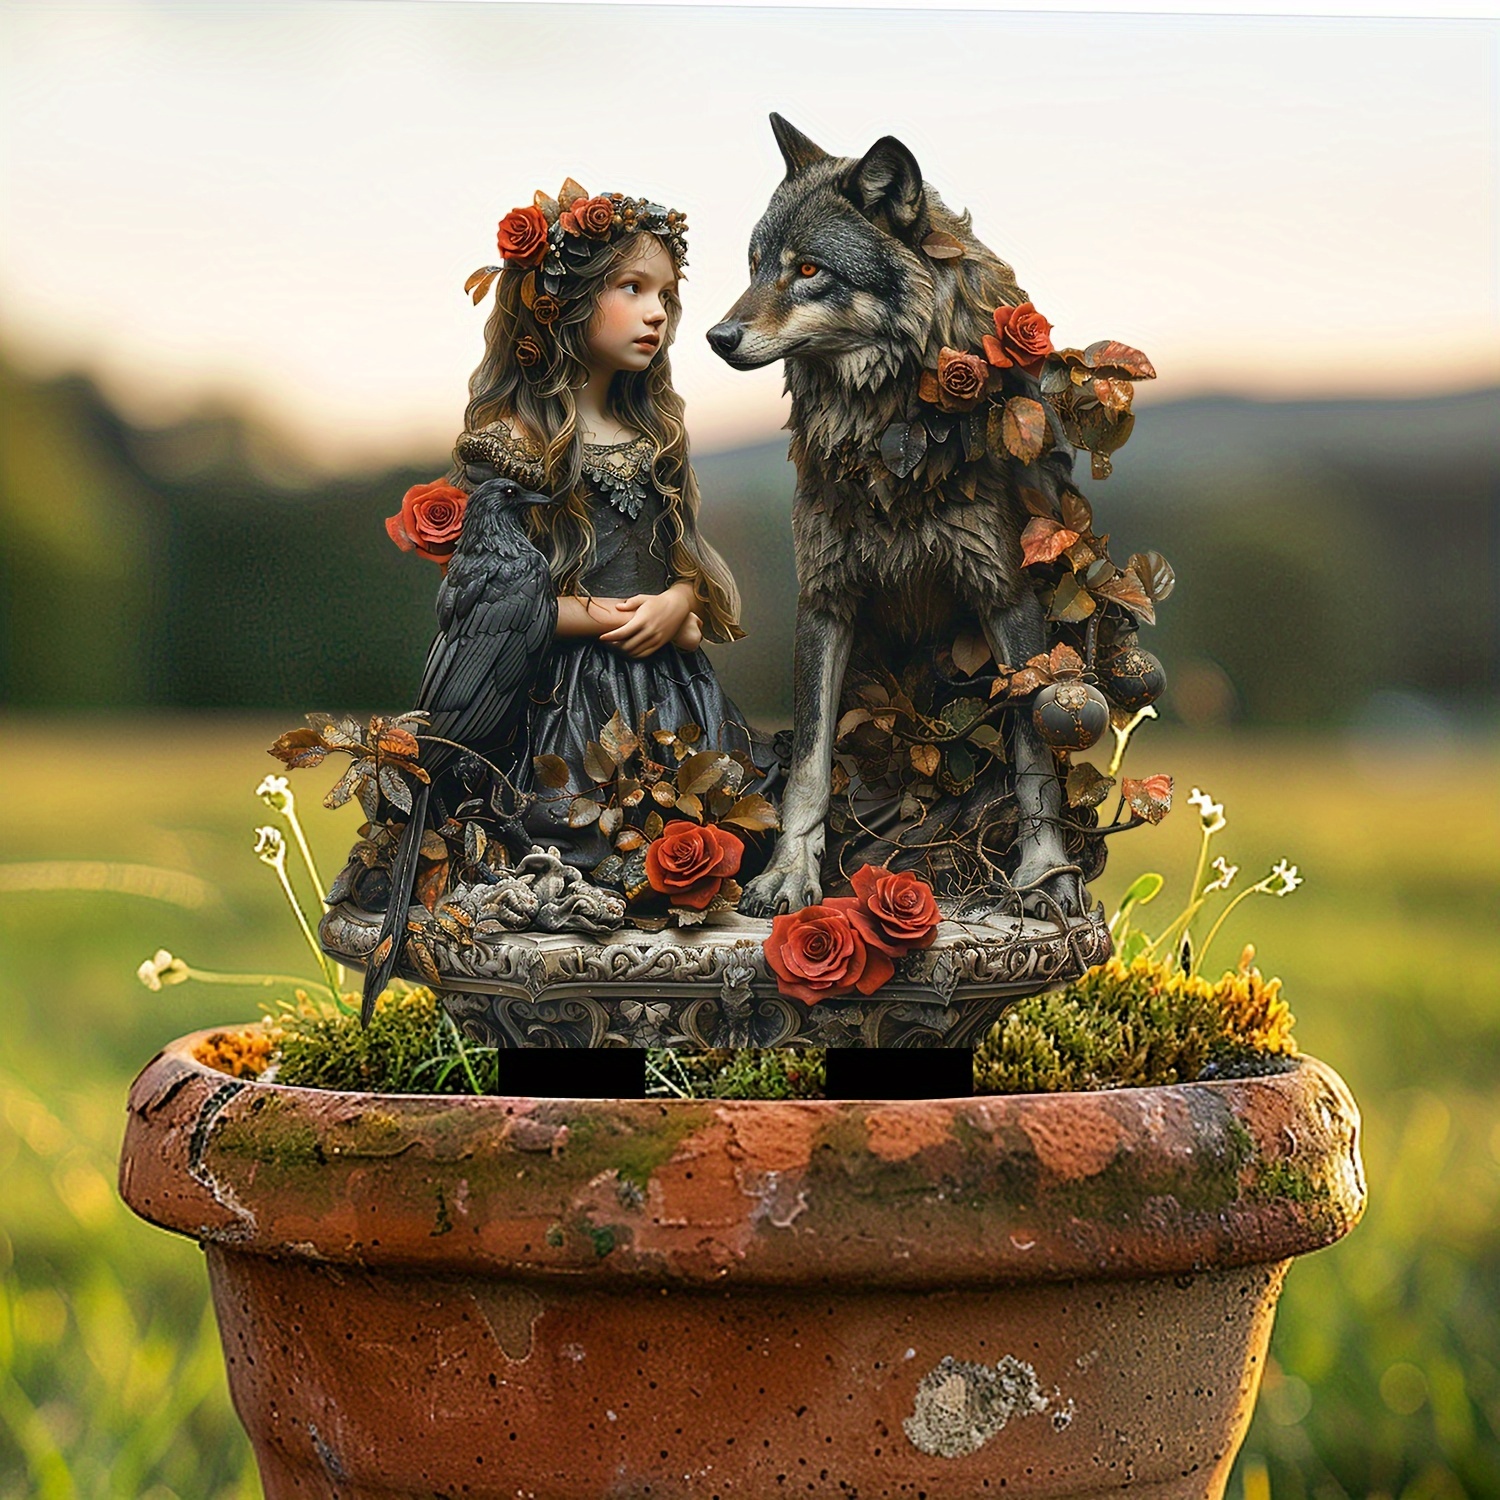 

Rose-adorned Girl And Wolf Acrylic Garden Sculpture: 11.8in X 8.2in, Waterproof, Scratch & Chemical Resistant, No Burring Clean Cut Edges